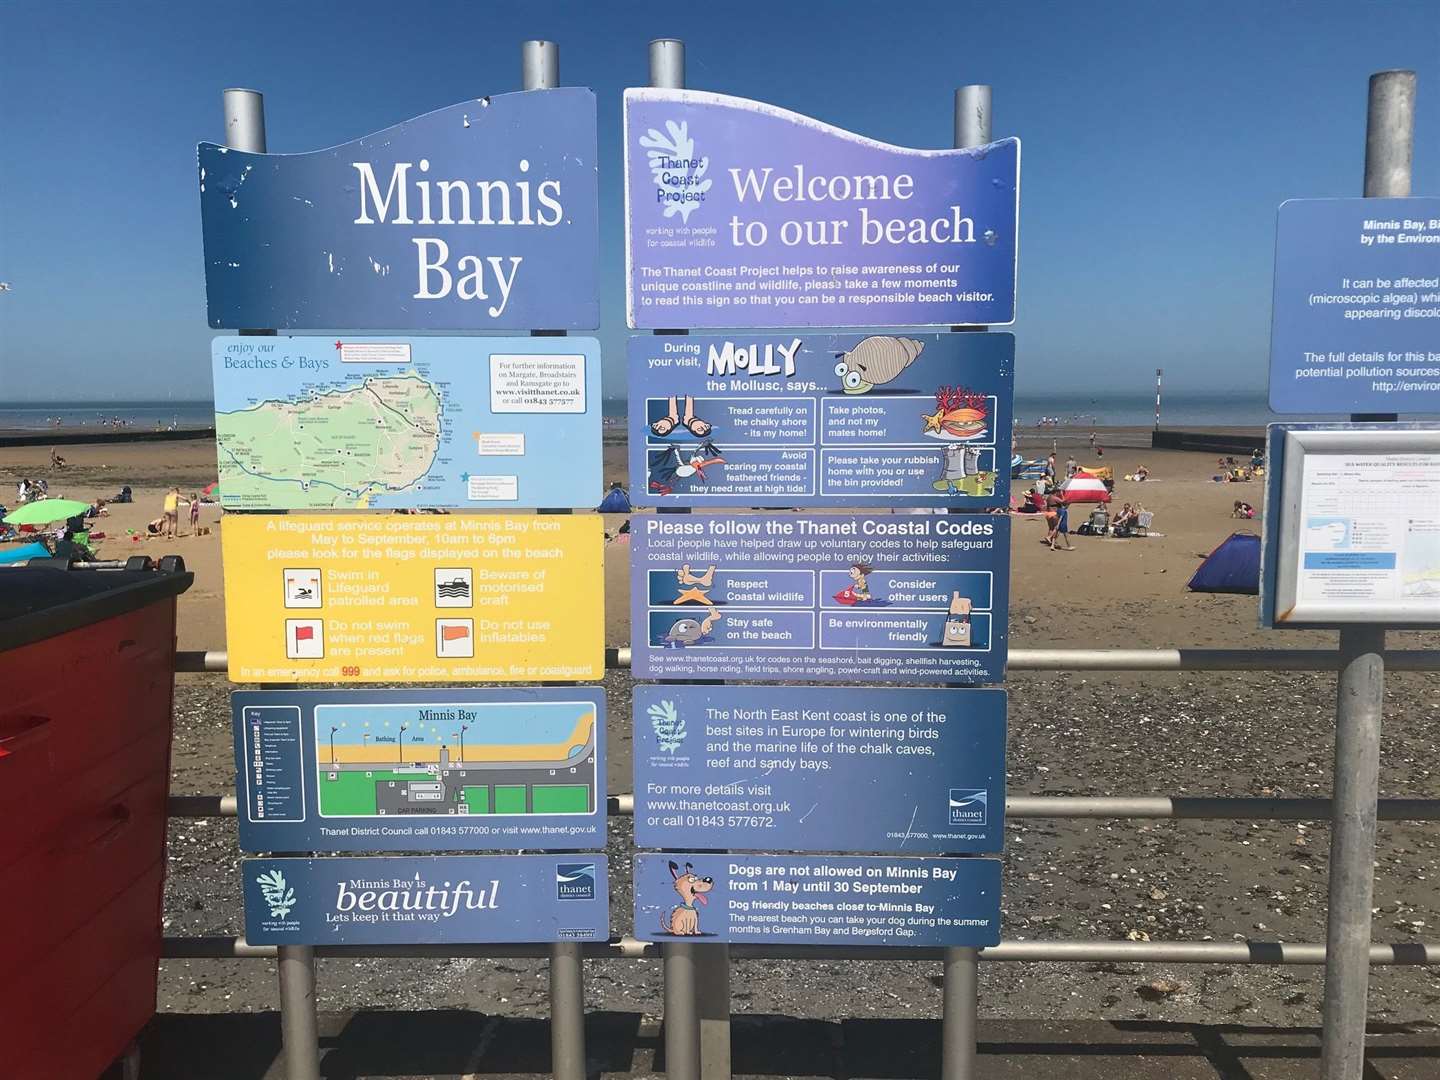 Minnis Bay is a popular destination for families